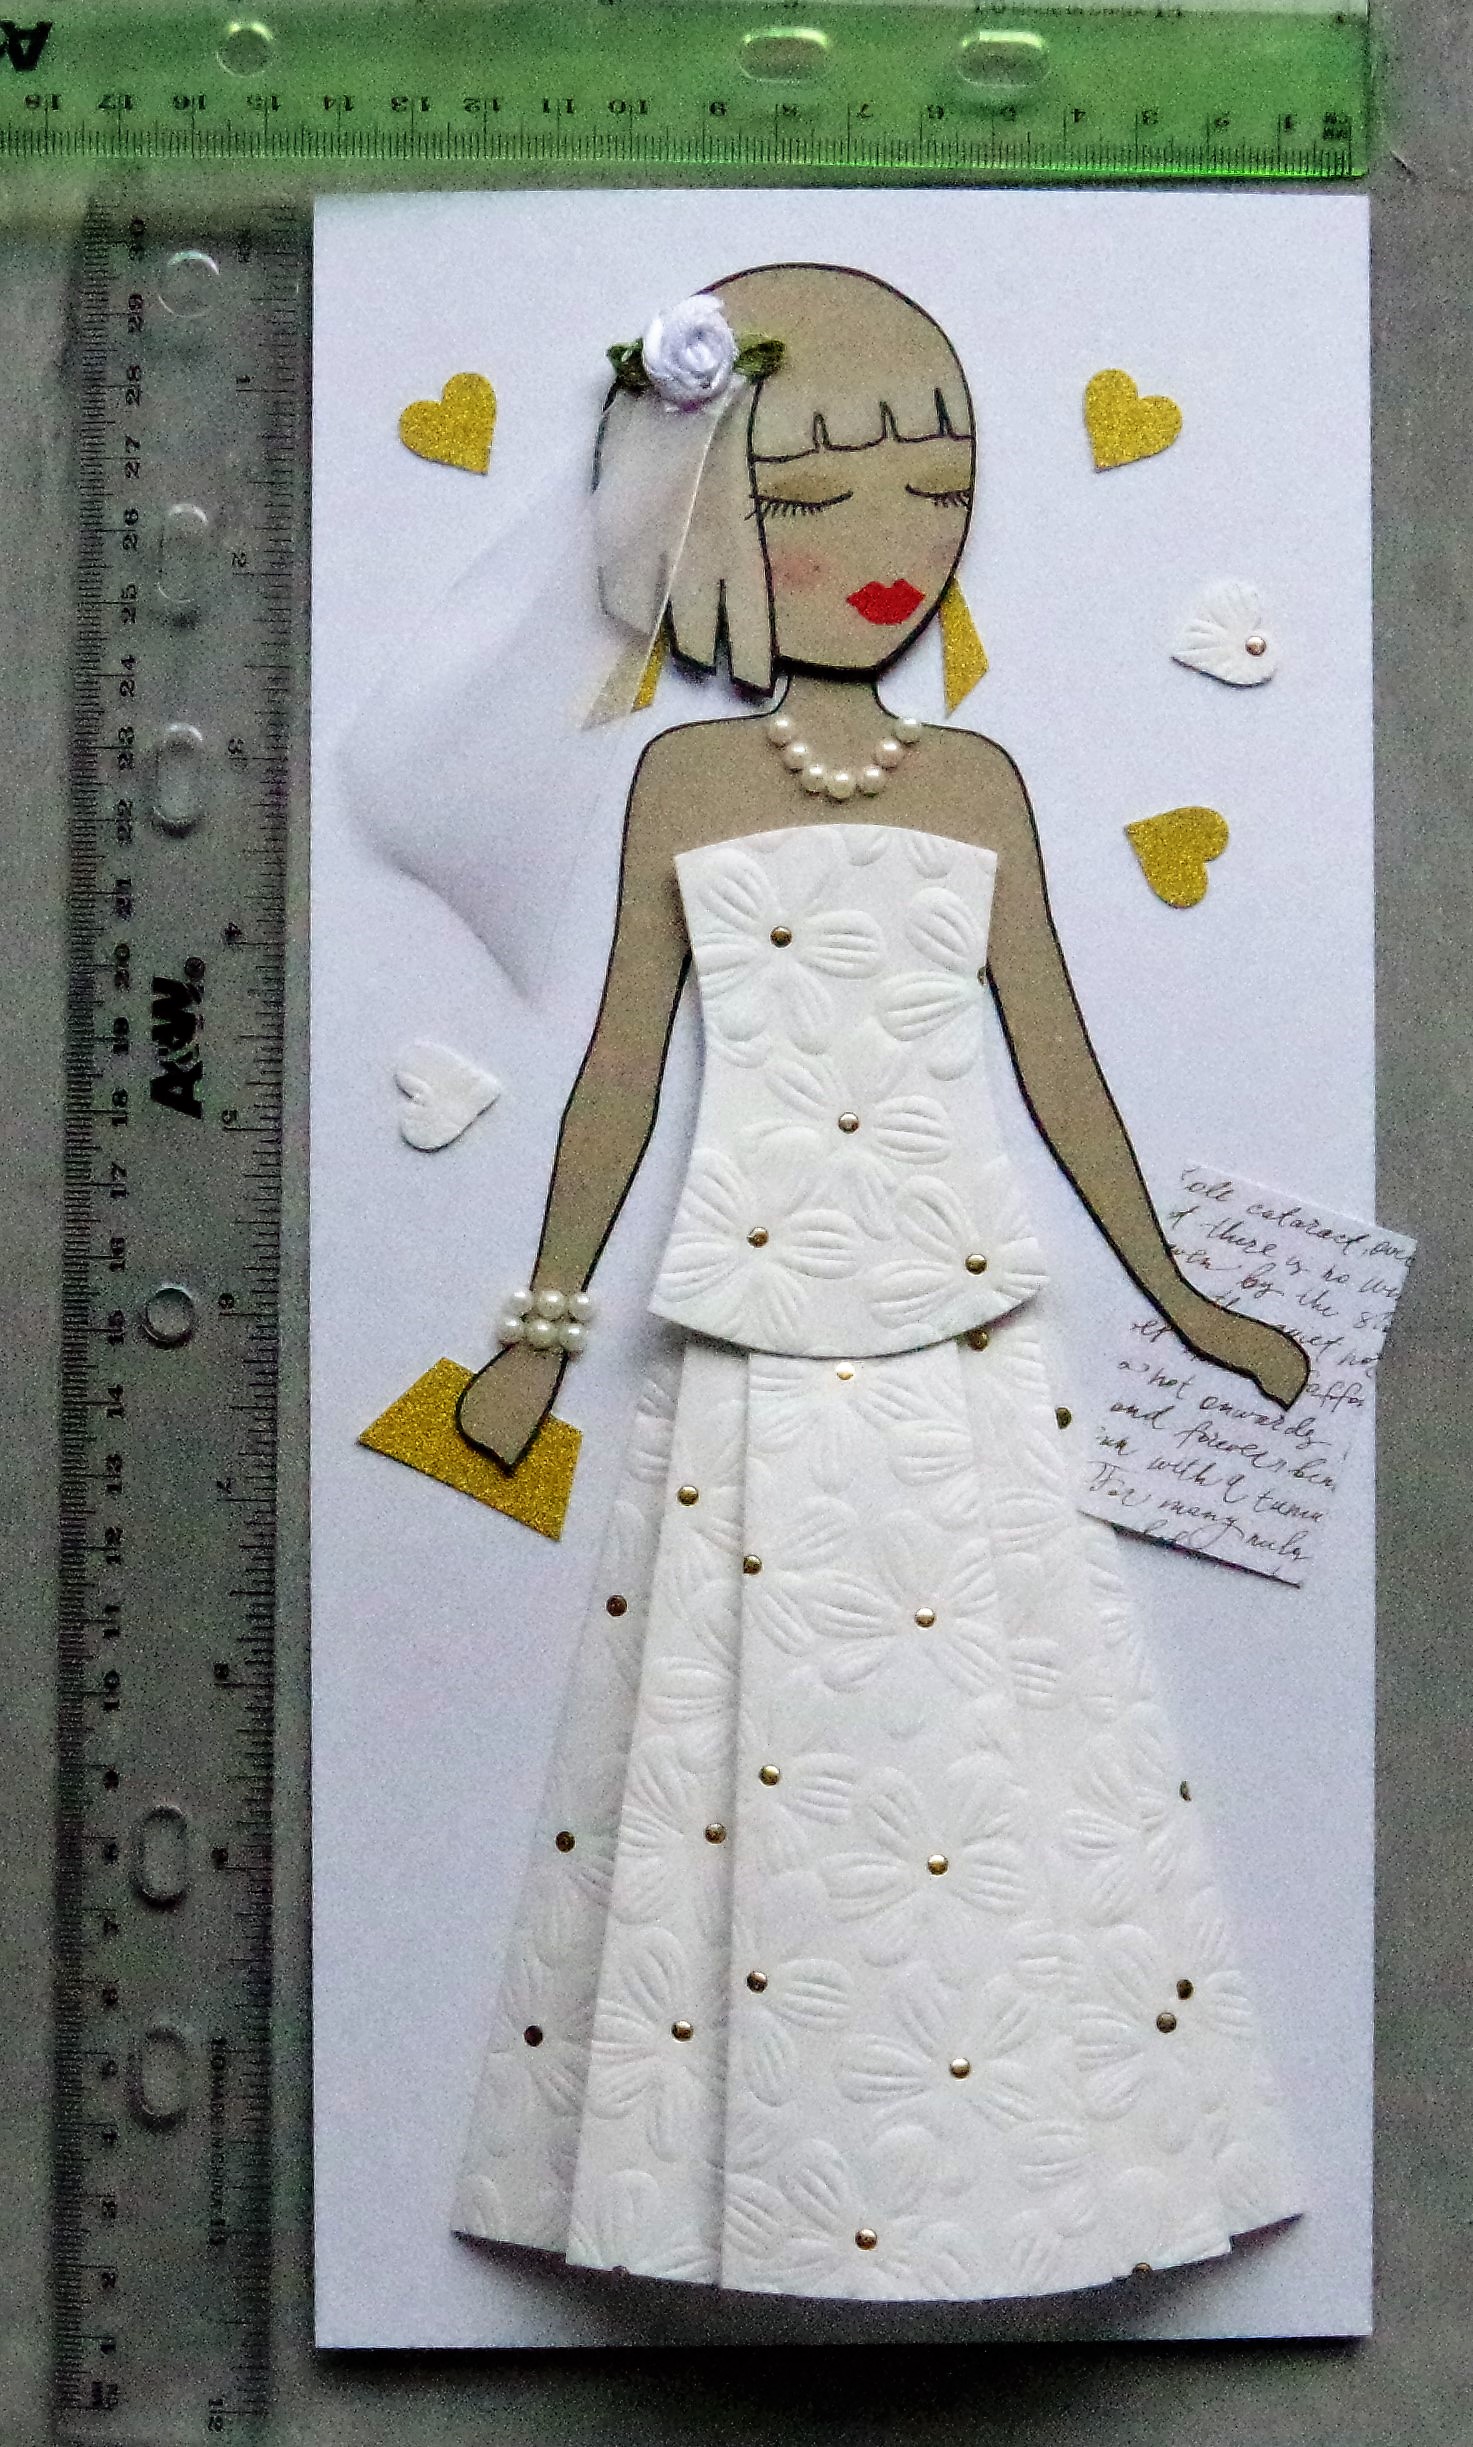 Wedding greeting card. For your friend, daughter. Tell her special personal words on her special day.